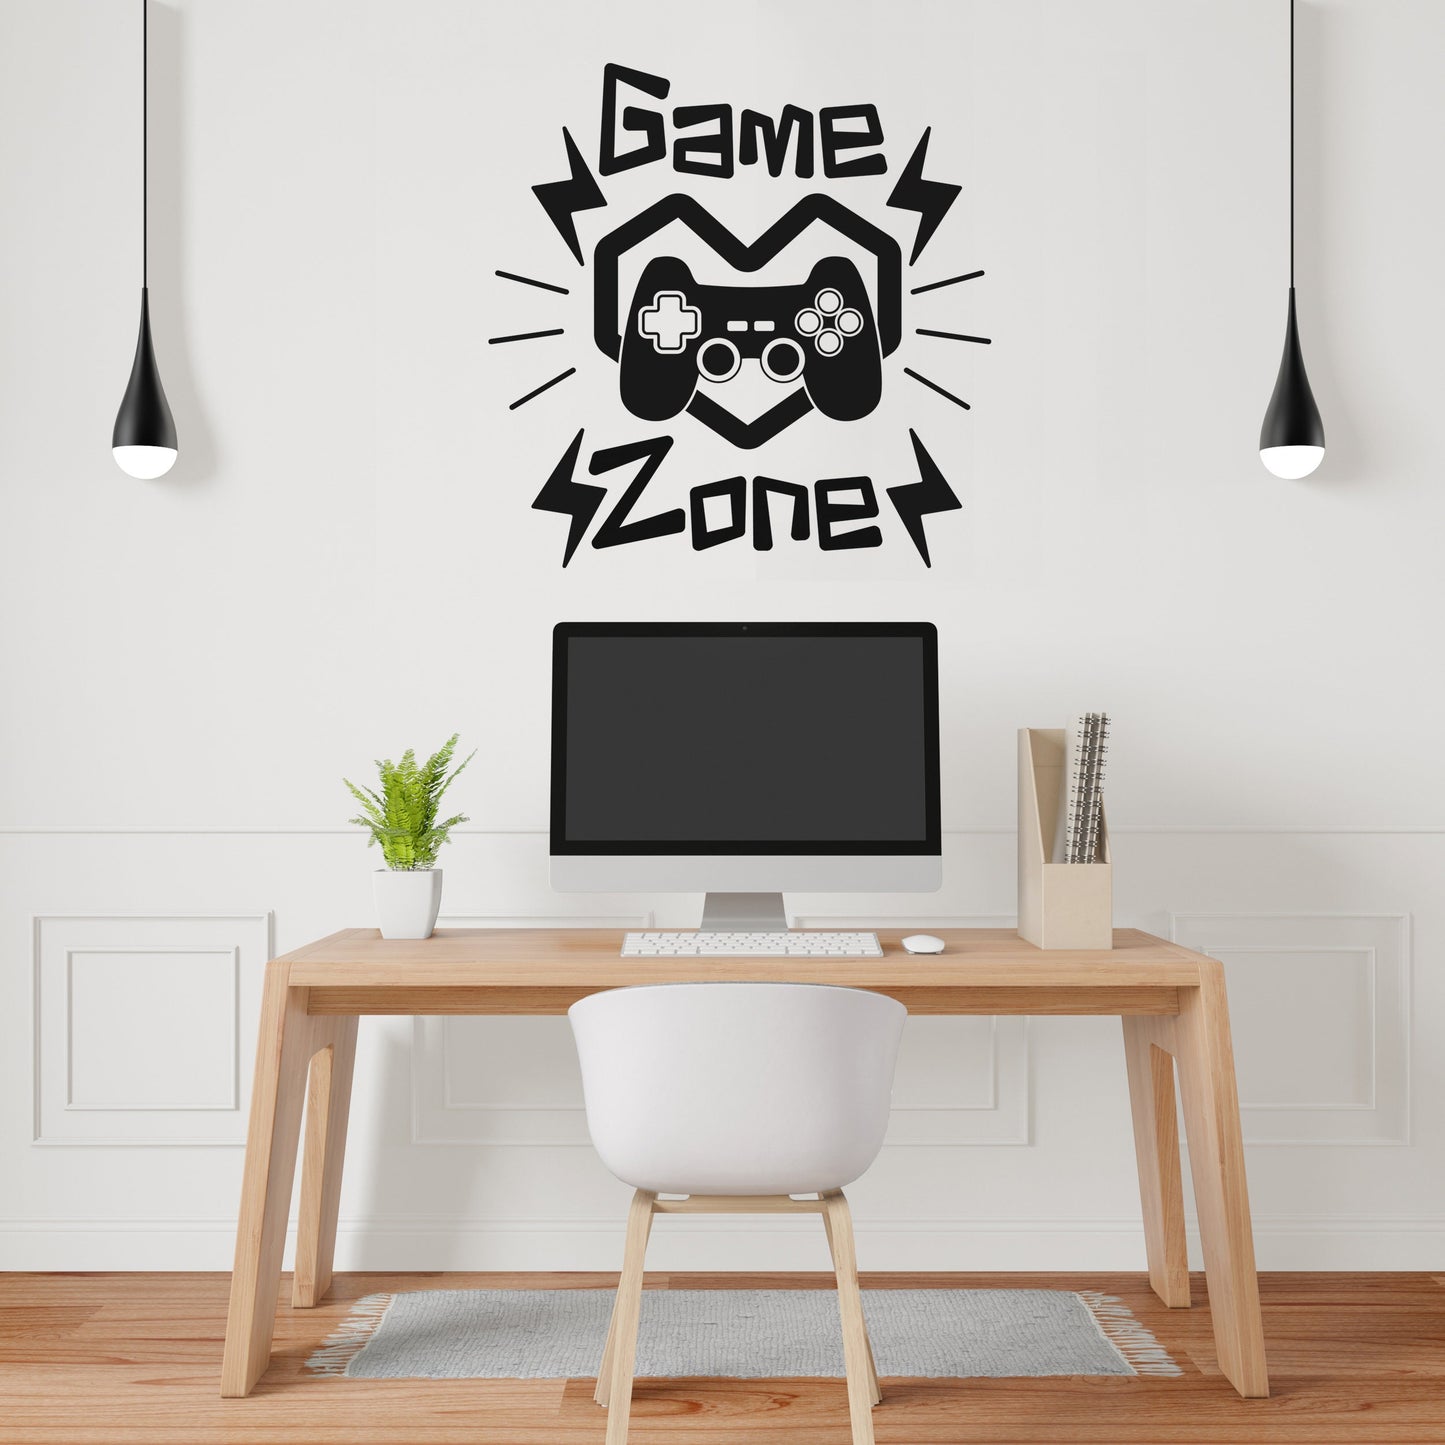 Wall Decor - Custom Name Gaming Zone Wall Vinyl Decal - Video Game Wall Sticker - Personalised Name Playroom Decor For Boys Room